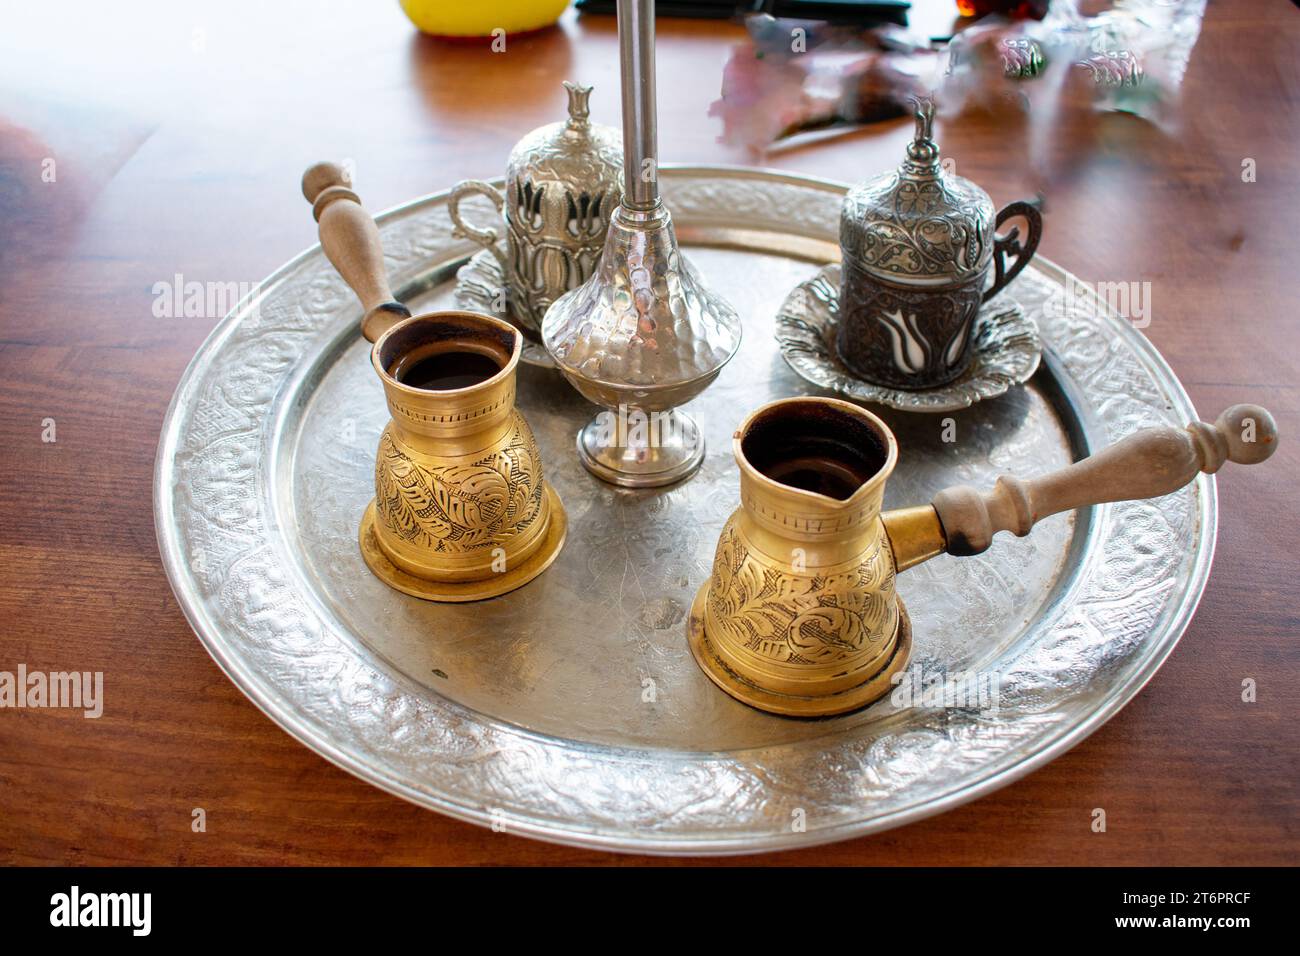 Traditional Tunisian Coffee, Closeup of ornamental decorative silver and gold cup and saucer with tea or coffee Stock Photo